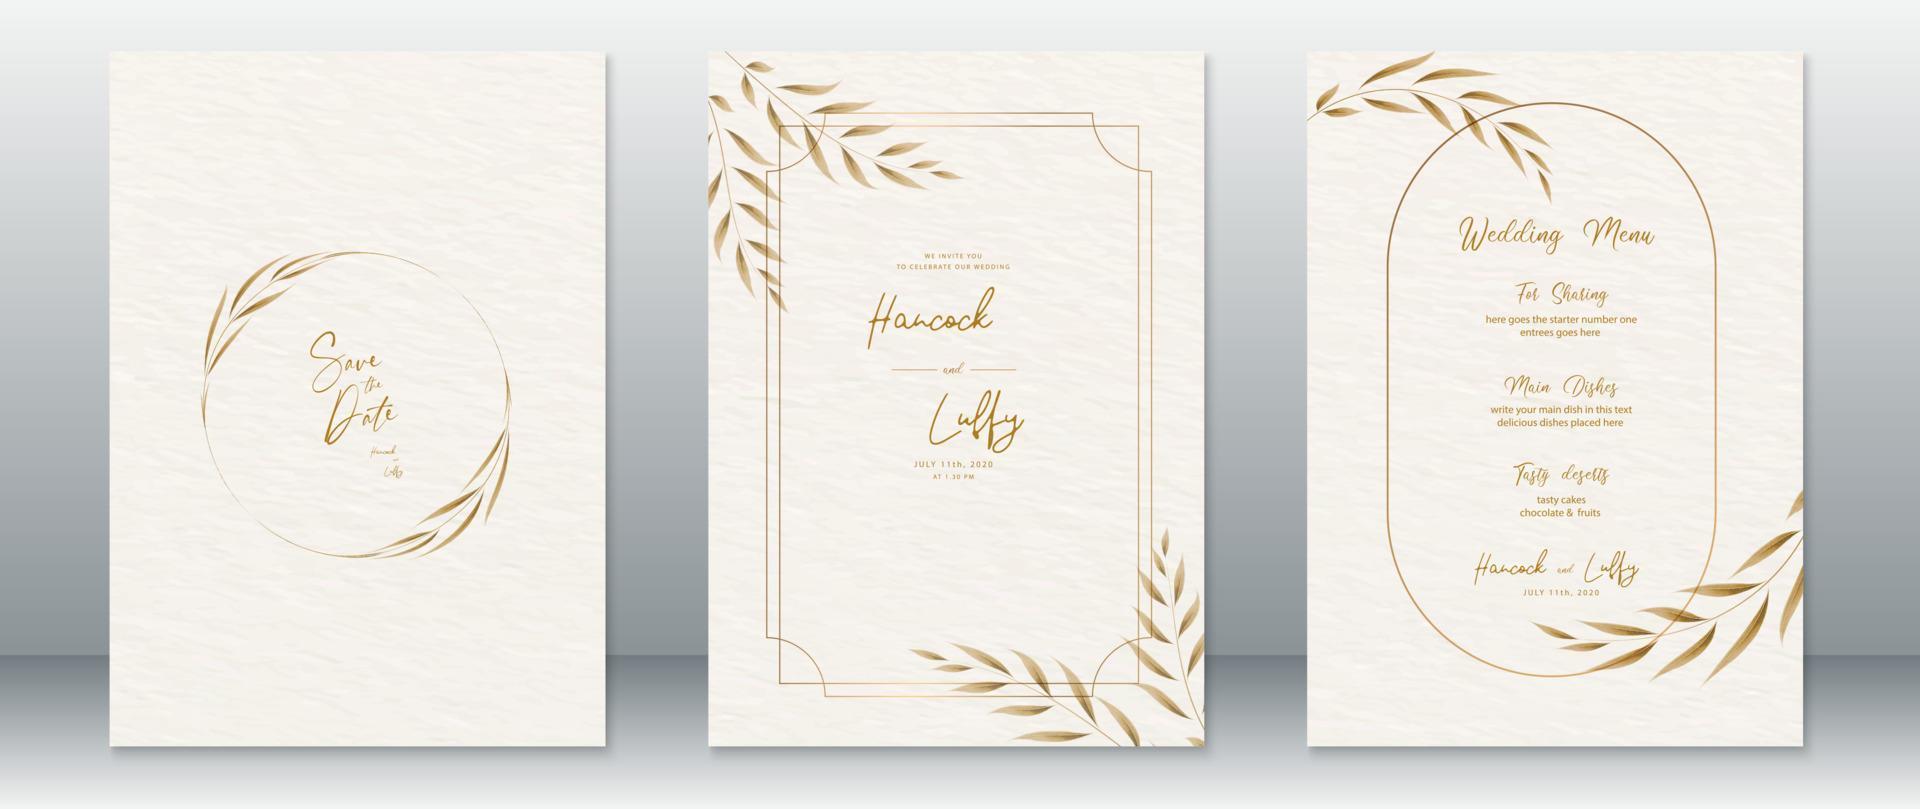 Wedding invitation card template luxury with gold design vector